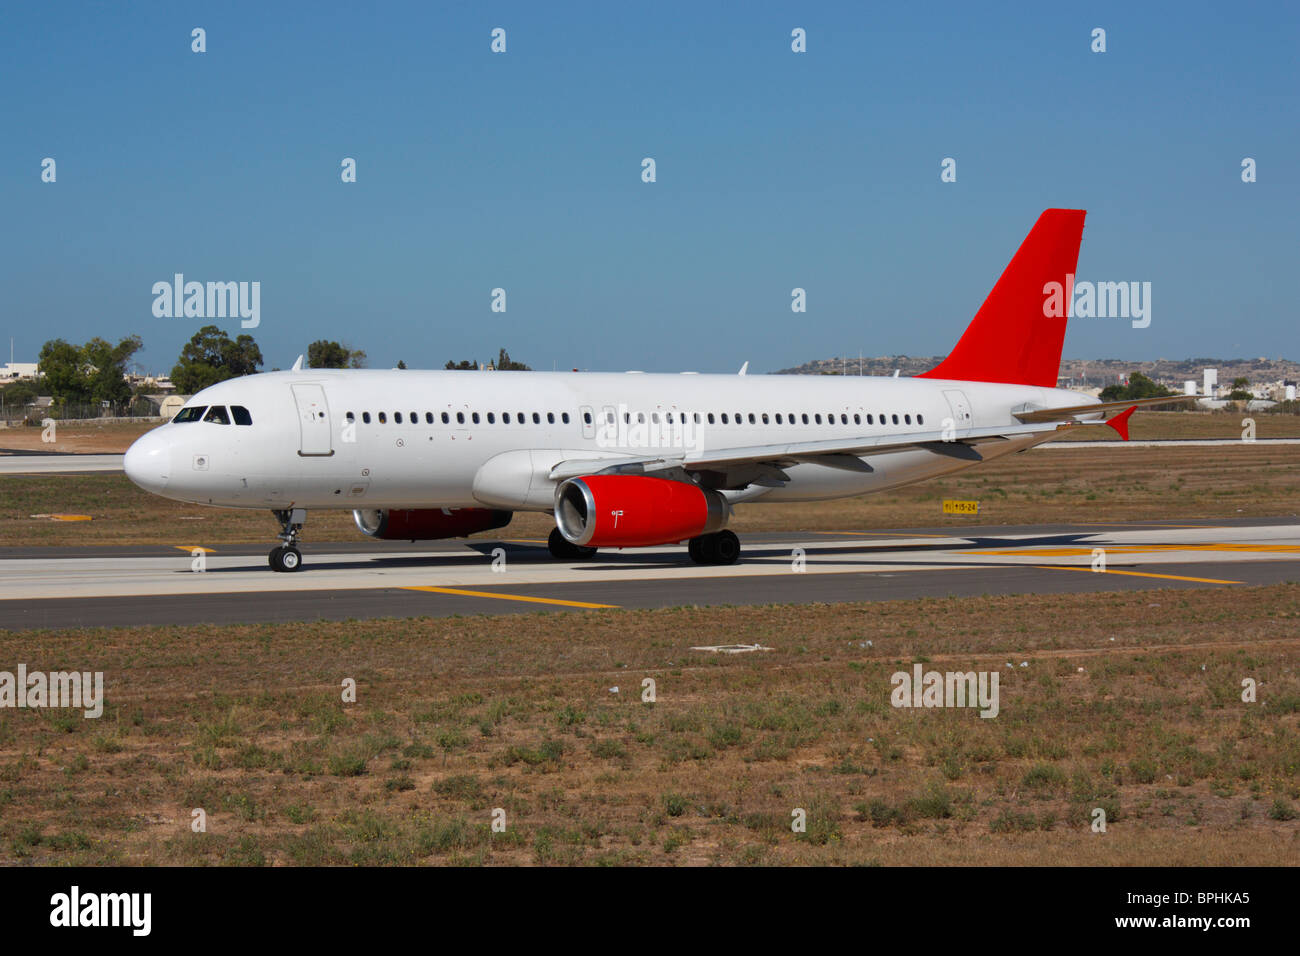 Air travel. Airbus A320 airliner taxiing for departure from airport. Proprietary details deleted. Commercial aviation. Stock Photo